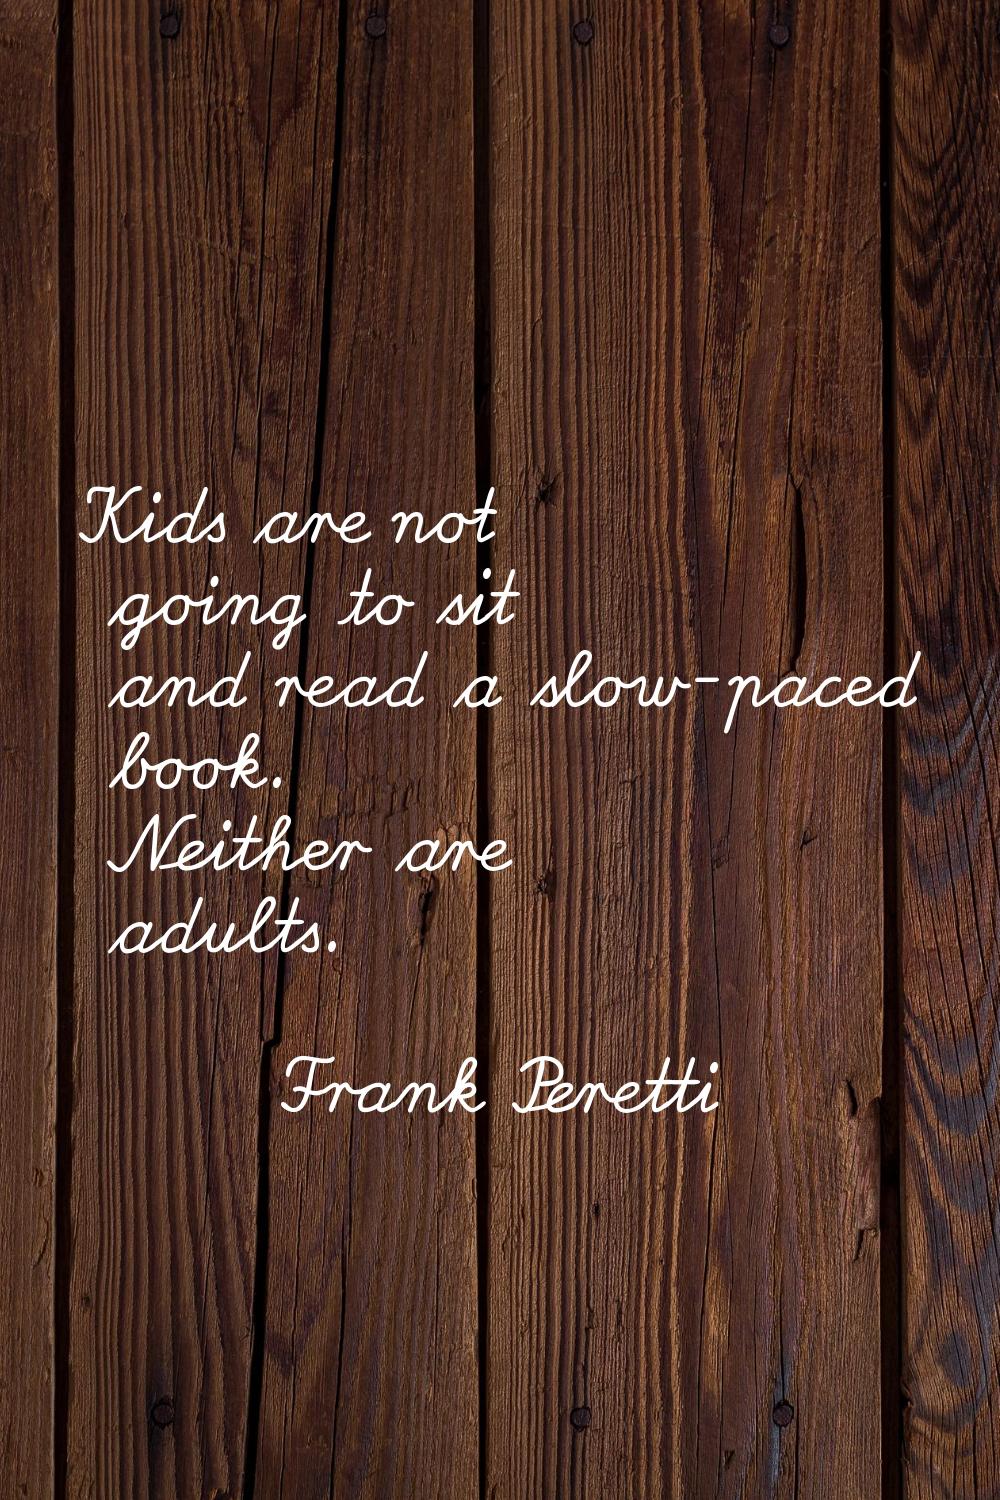 Kids are not going to sit and read a slow-paced book. Neither are adults.